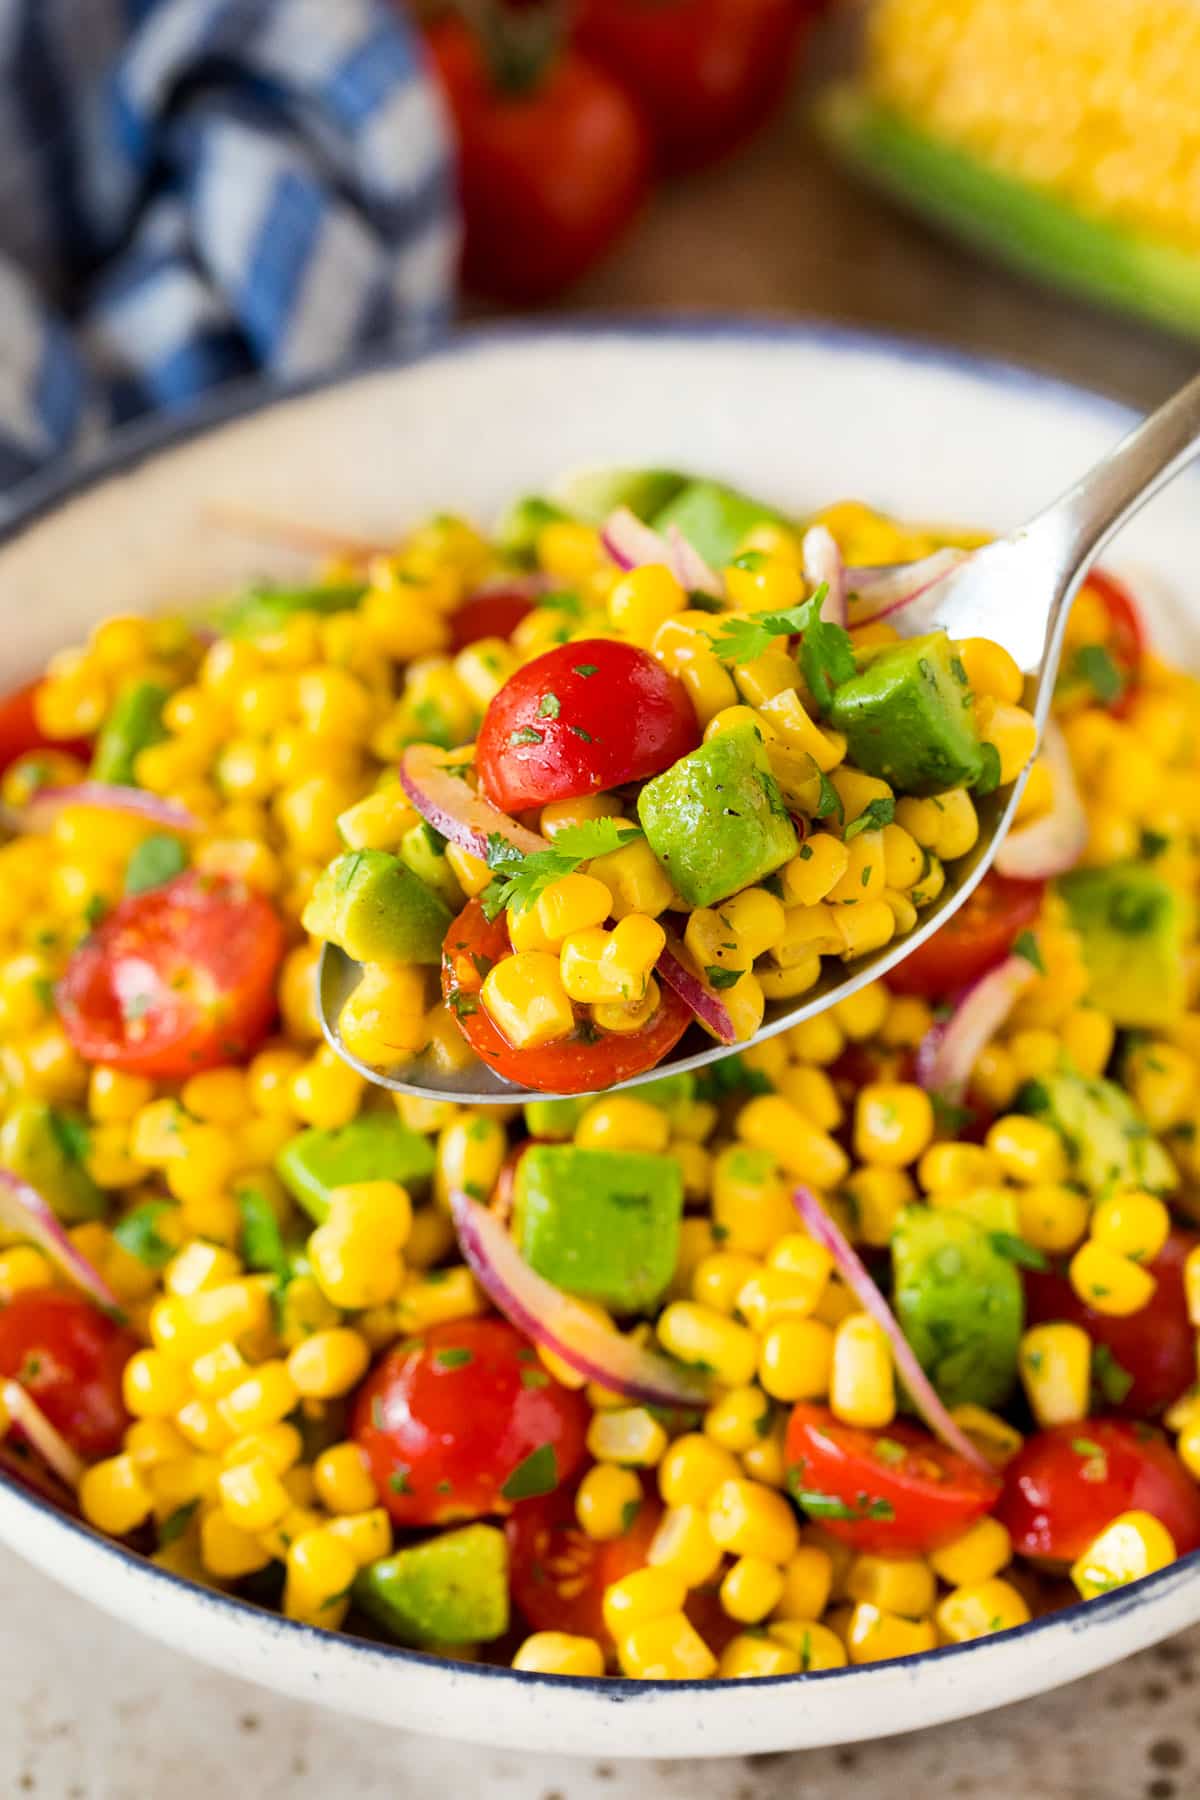 A spoon serving up a portion of salad made with avocado and corn.